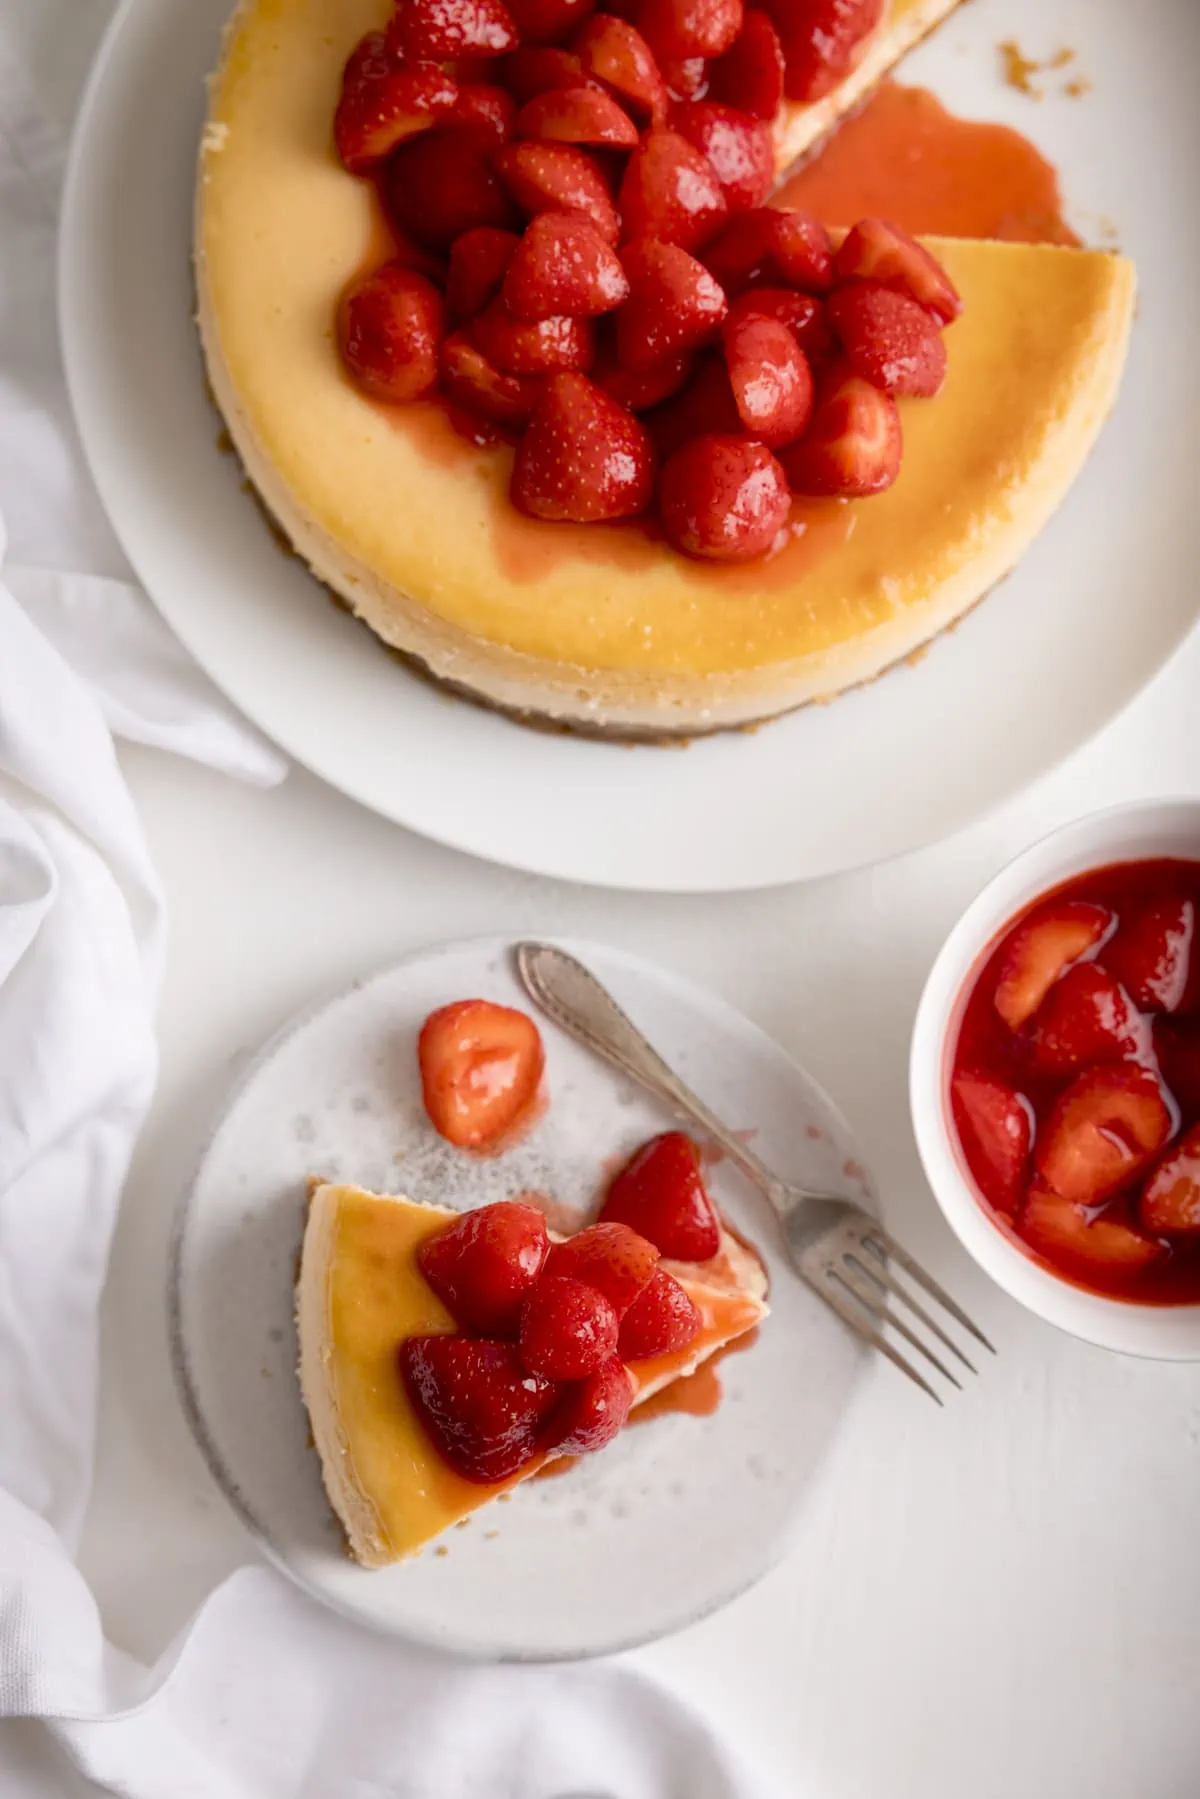 Overhead shot of a slice of strawberry cheesecake on a white plate next to the rest of the cheesecake and a white bowl filled with strawberry compote. Everything is set on a white background.